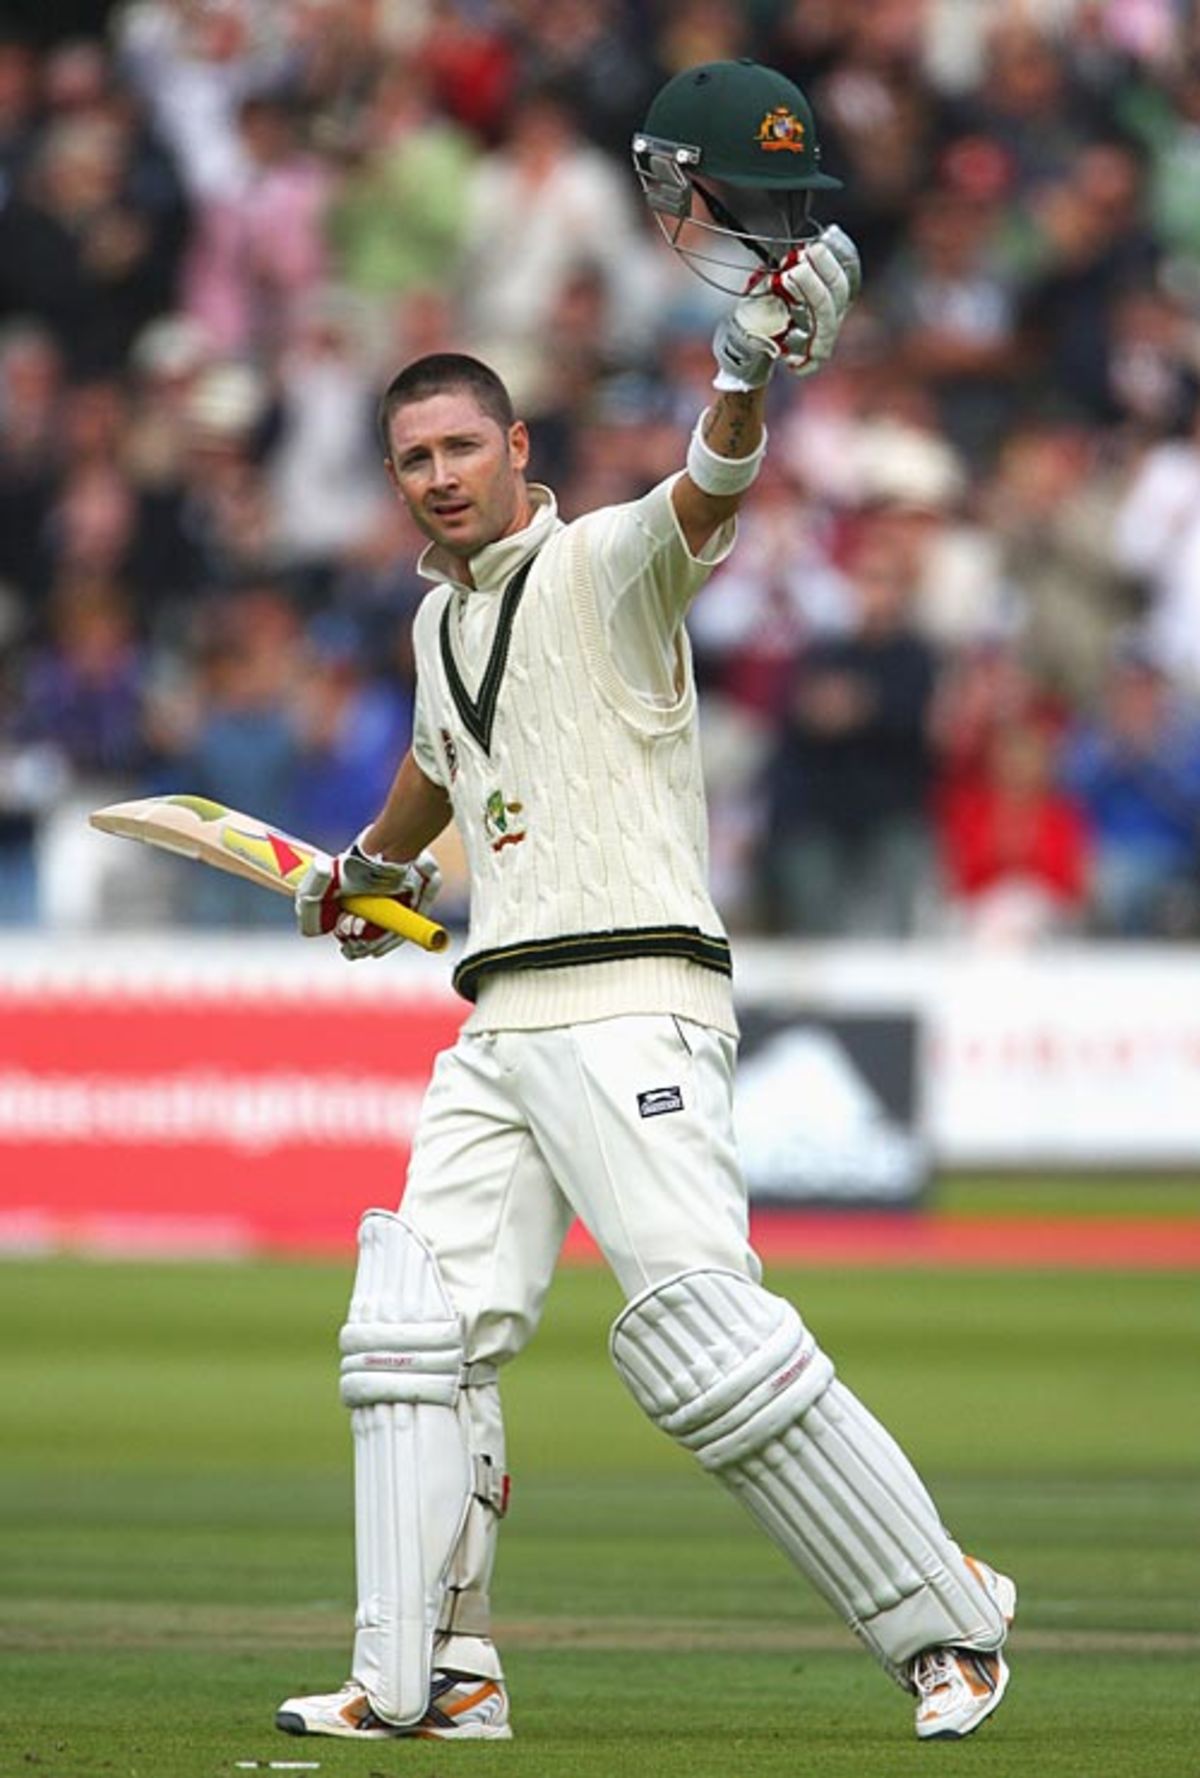 Michael Clarke celebrates his century, England v Australia, 2nd Test, Lord's, 4th day, July 19, 2009